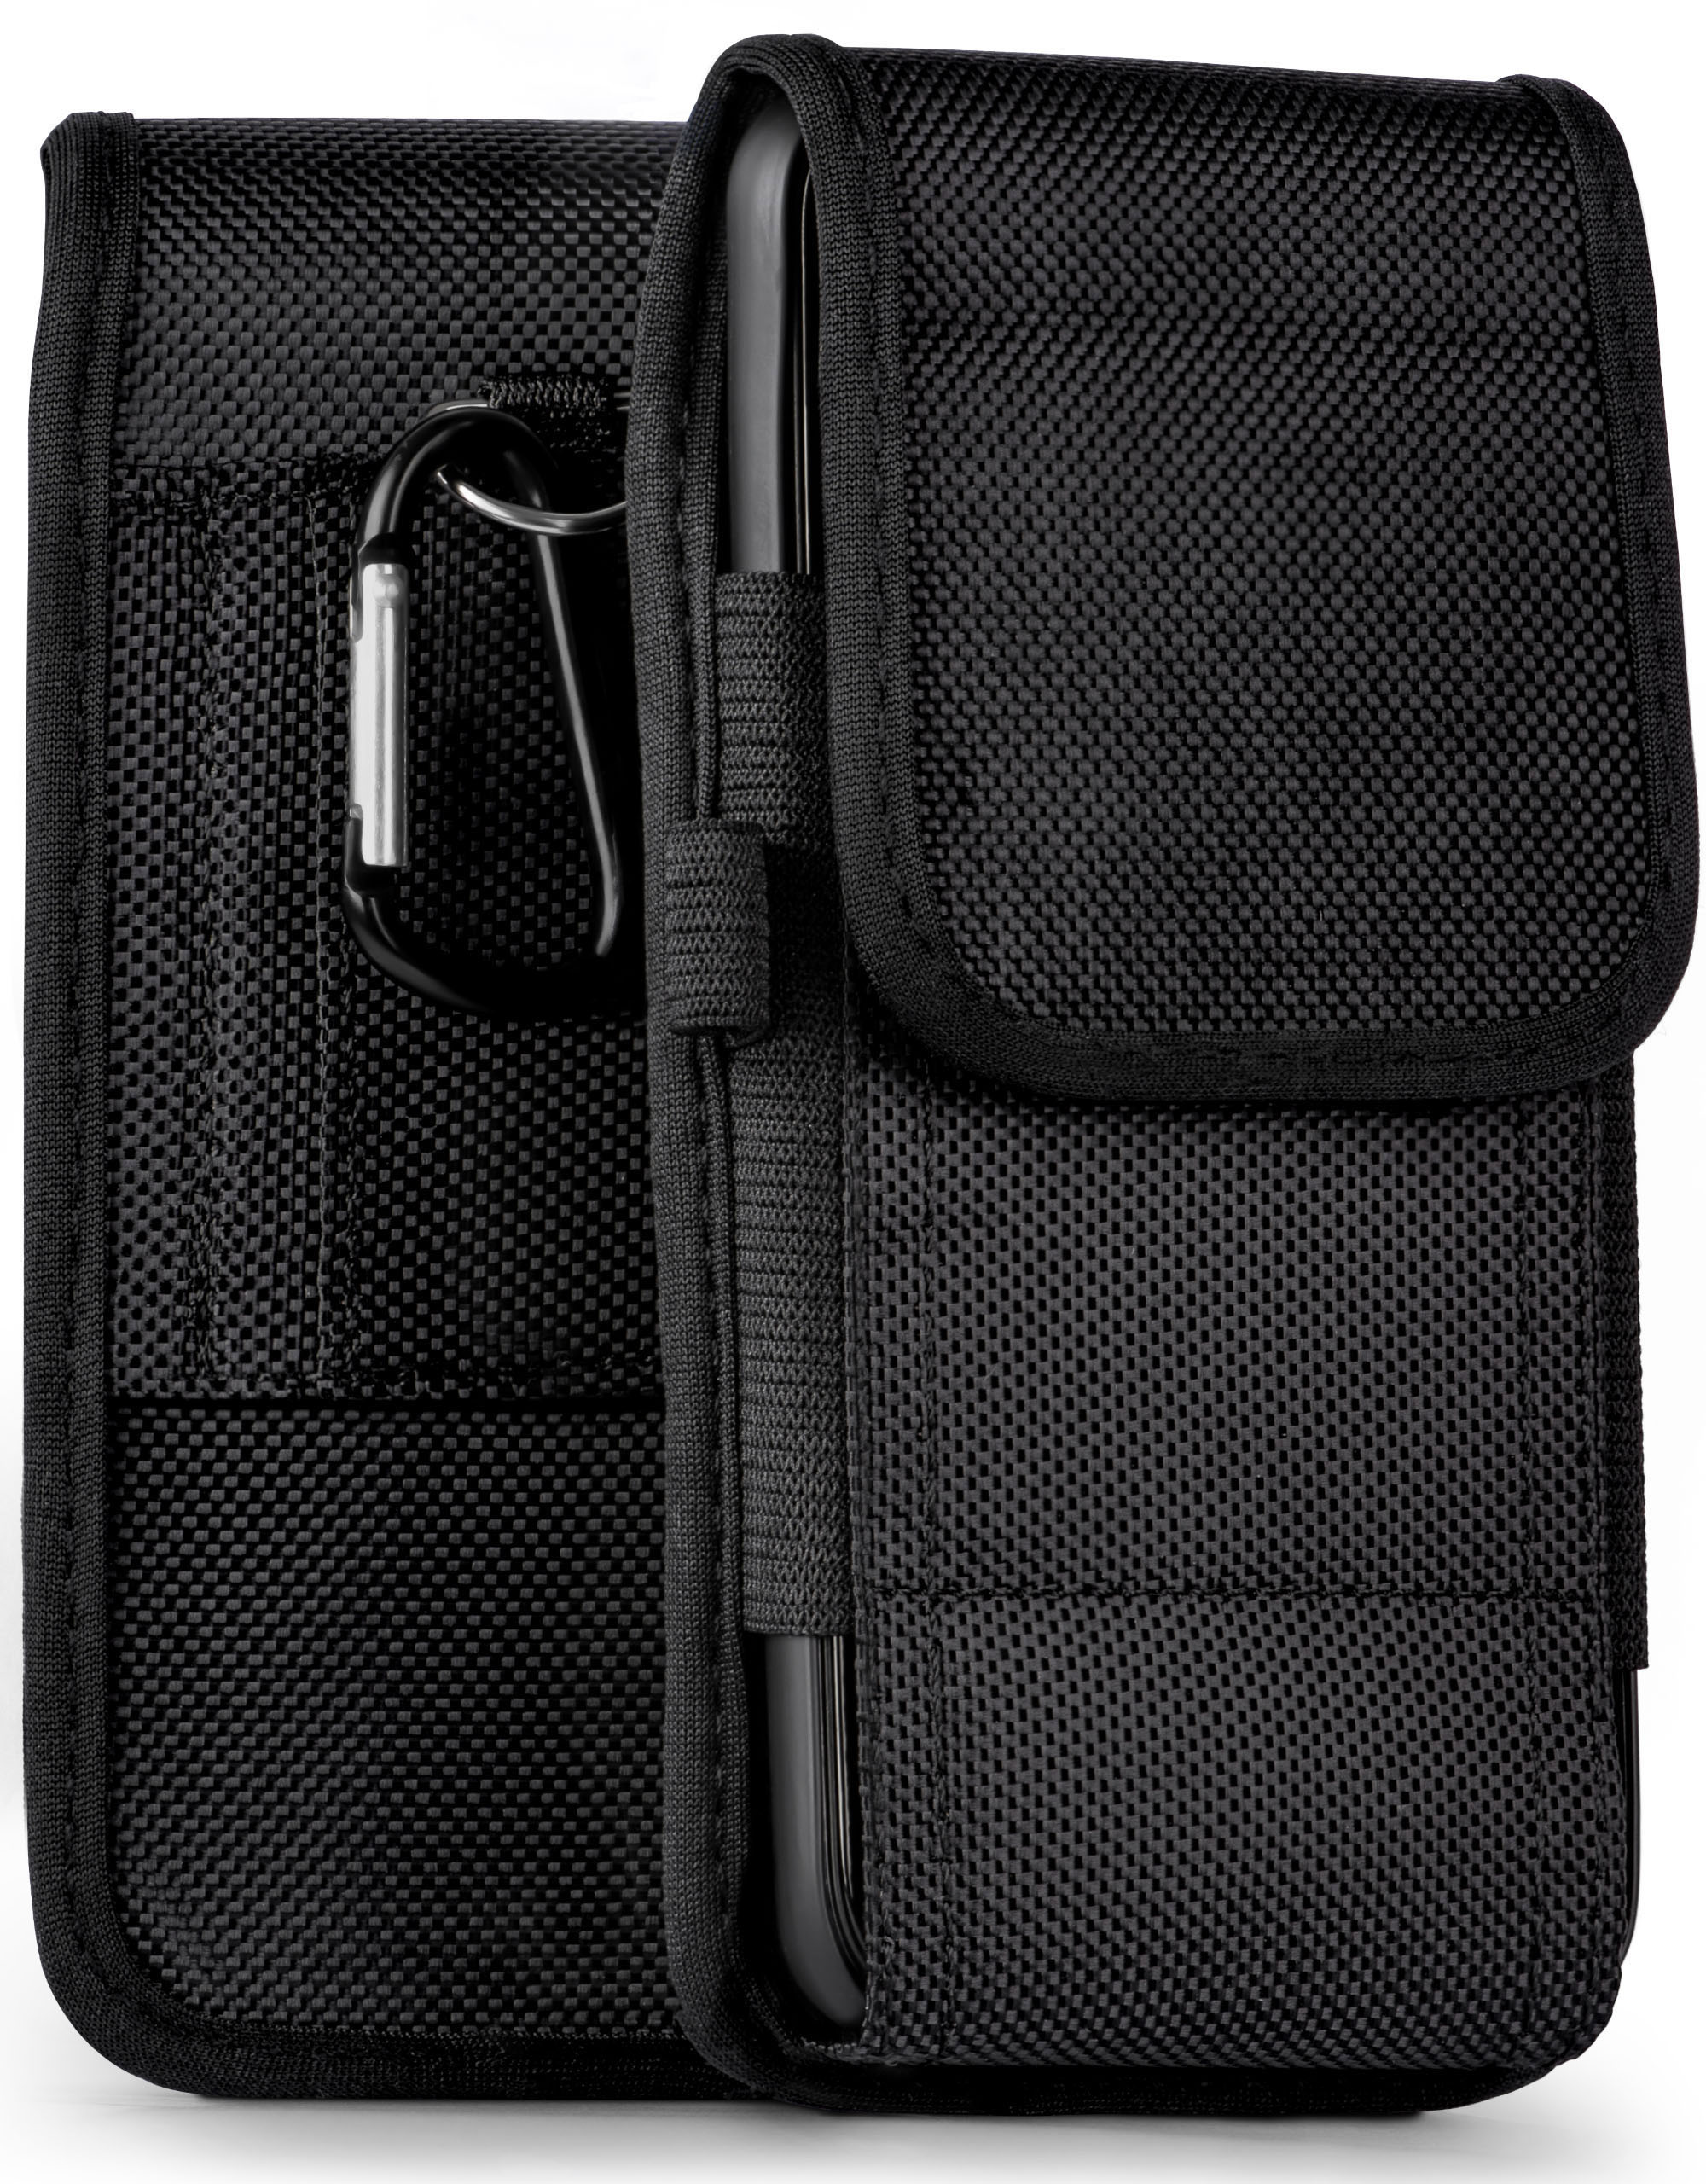 MOEX Agility Case, Holster, C10, Aquos Sharp, Trail